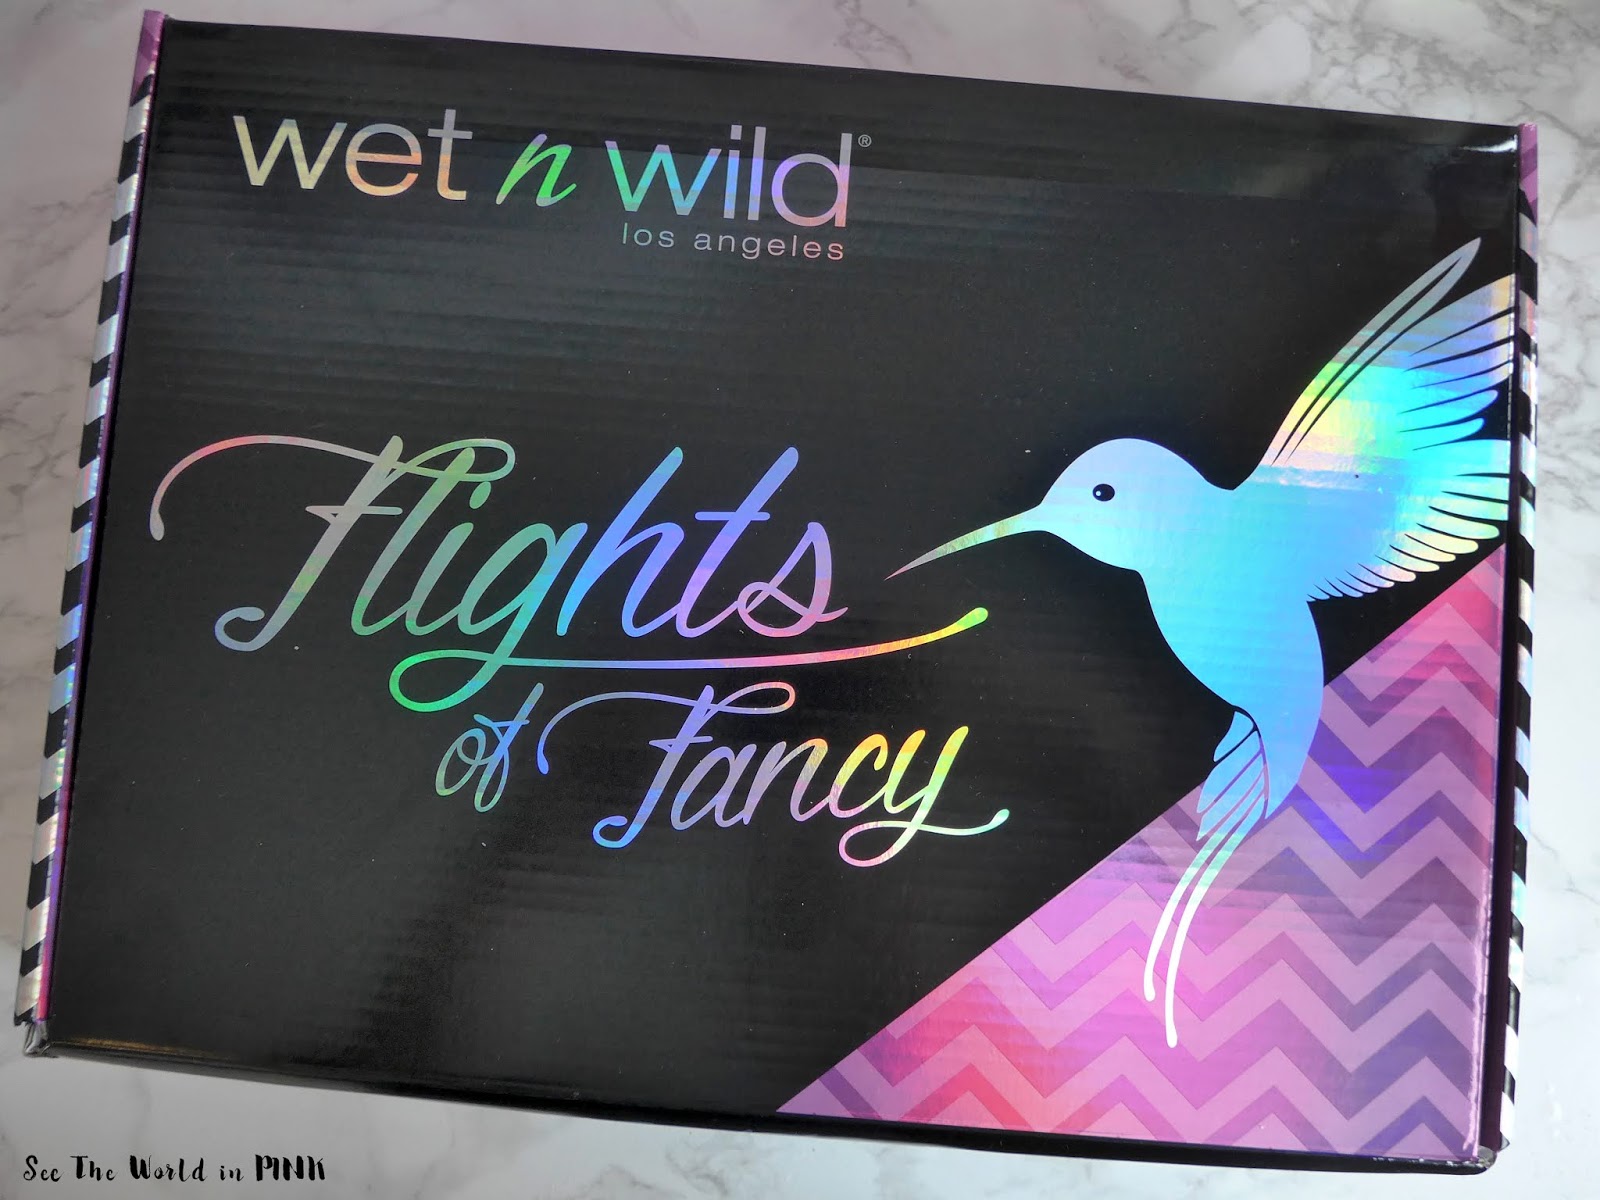 Wet N Wild "Flights of Fancy" Summer Collection Box - Swatches, Makeup Look and Review! 